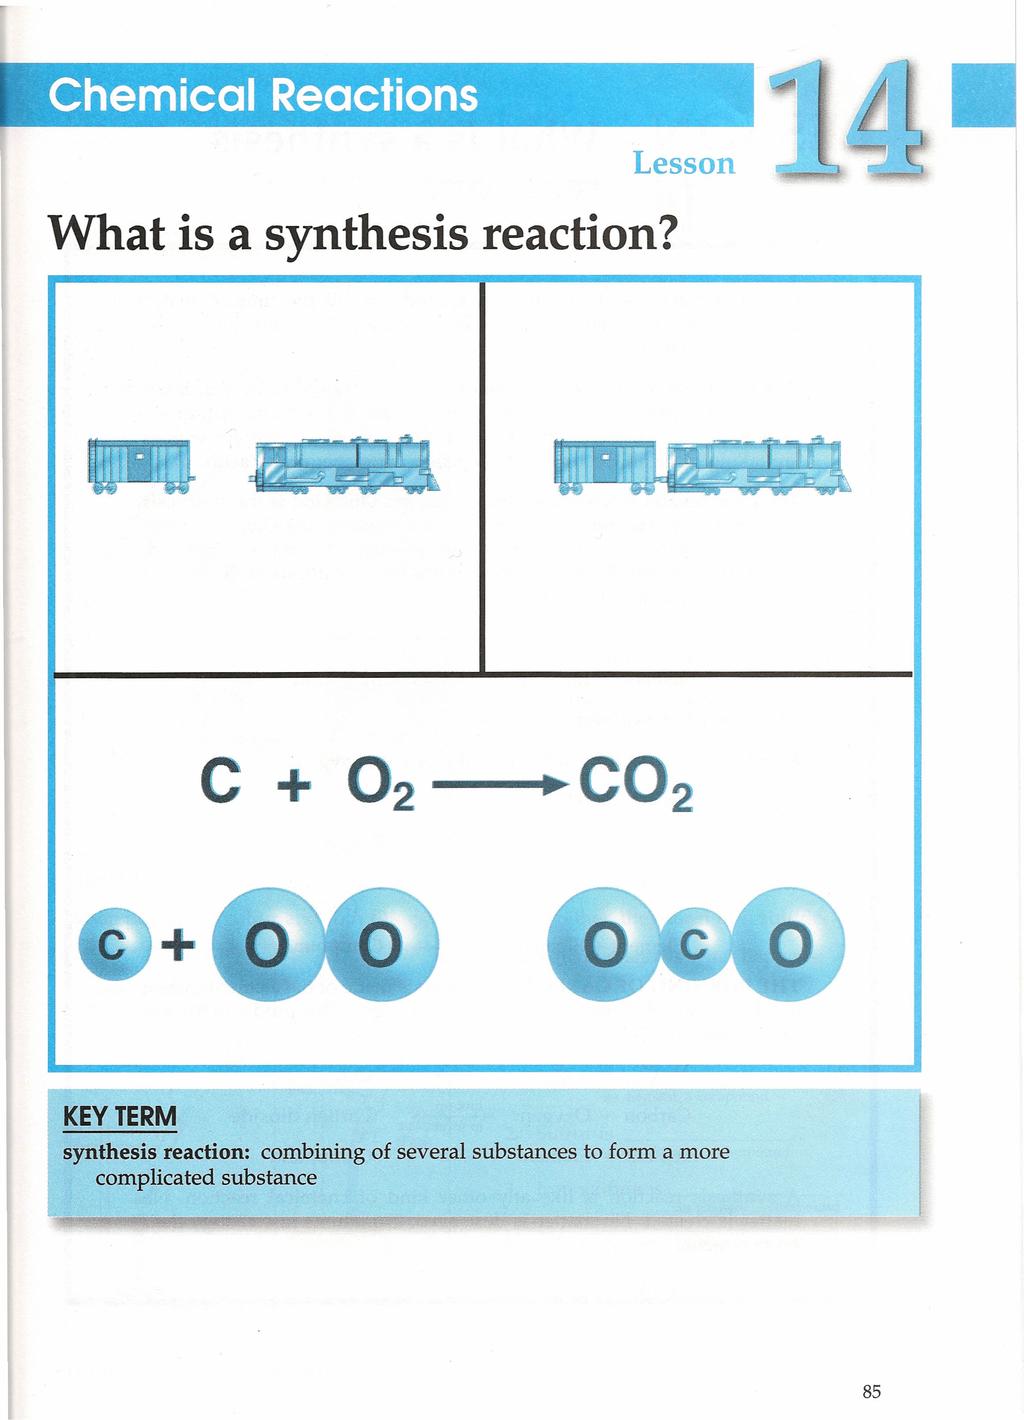 What is a synthesis reaction?